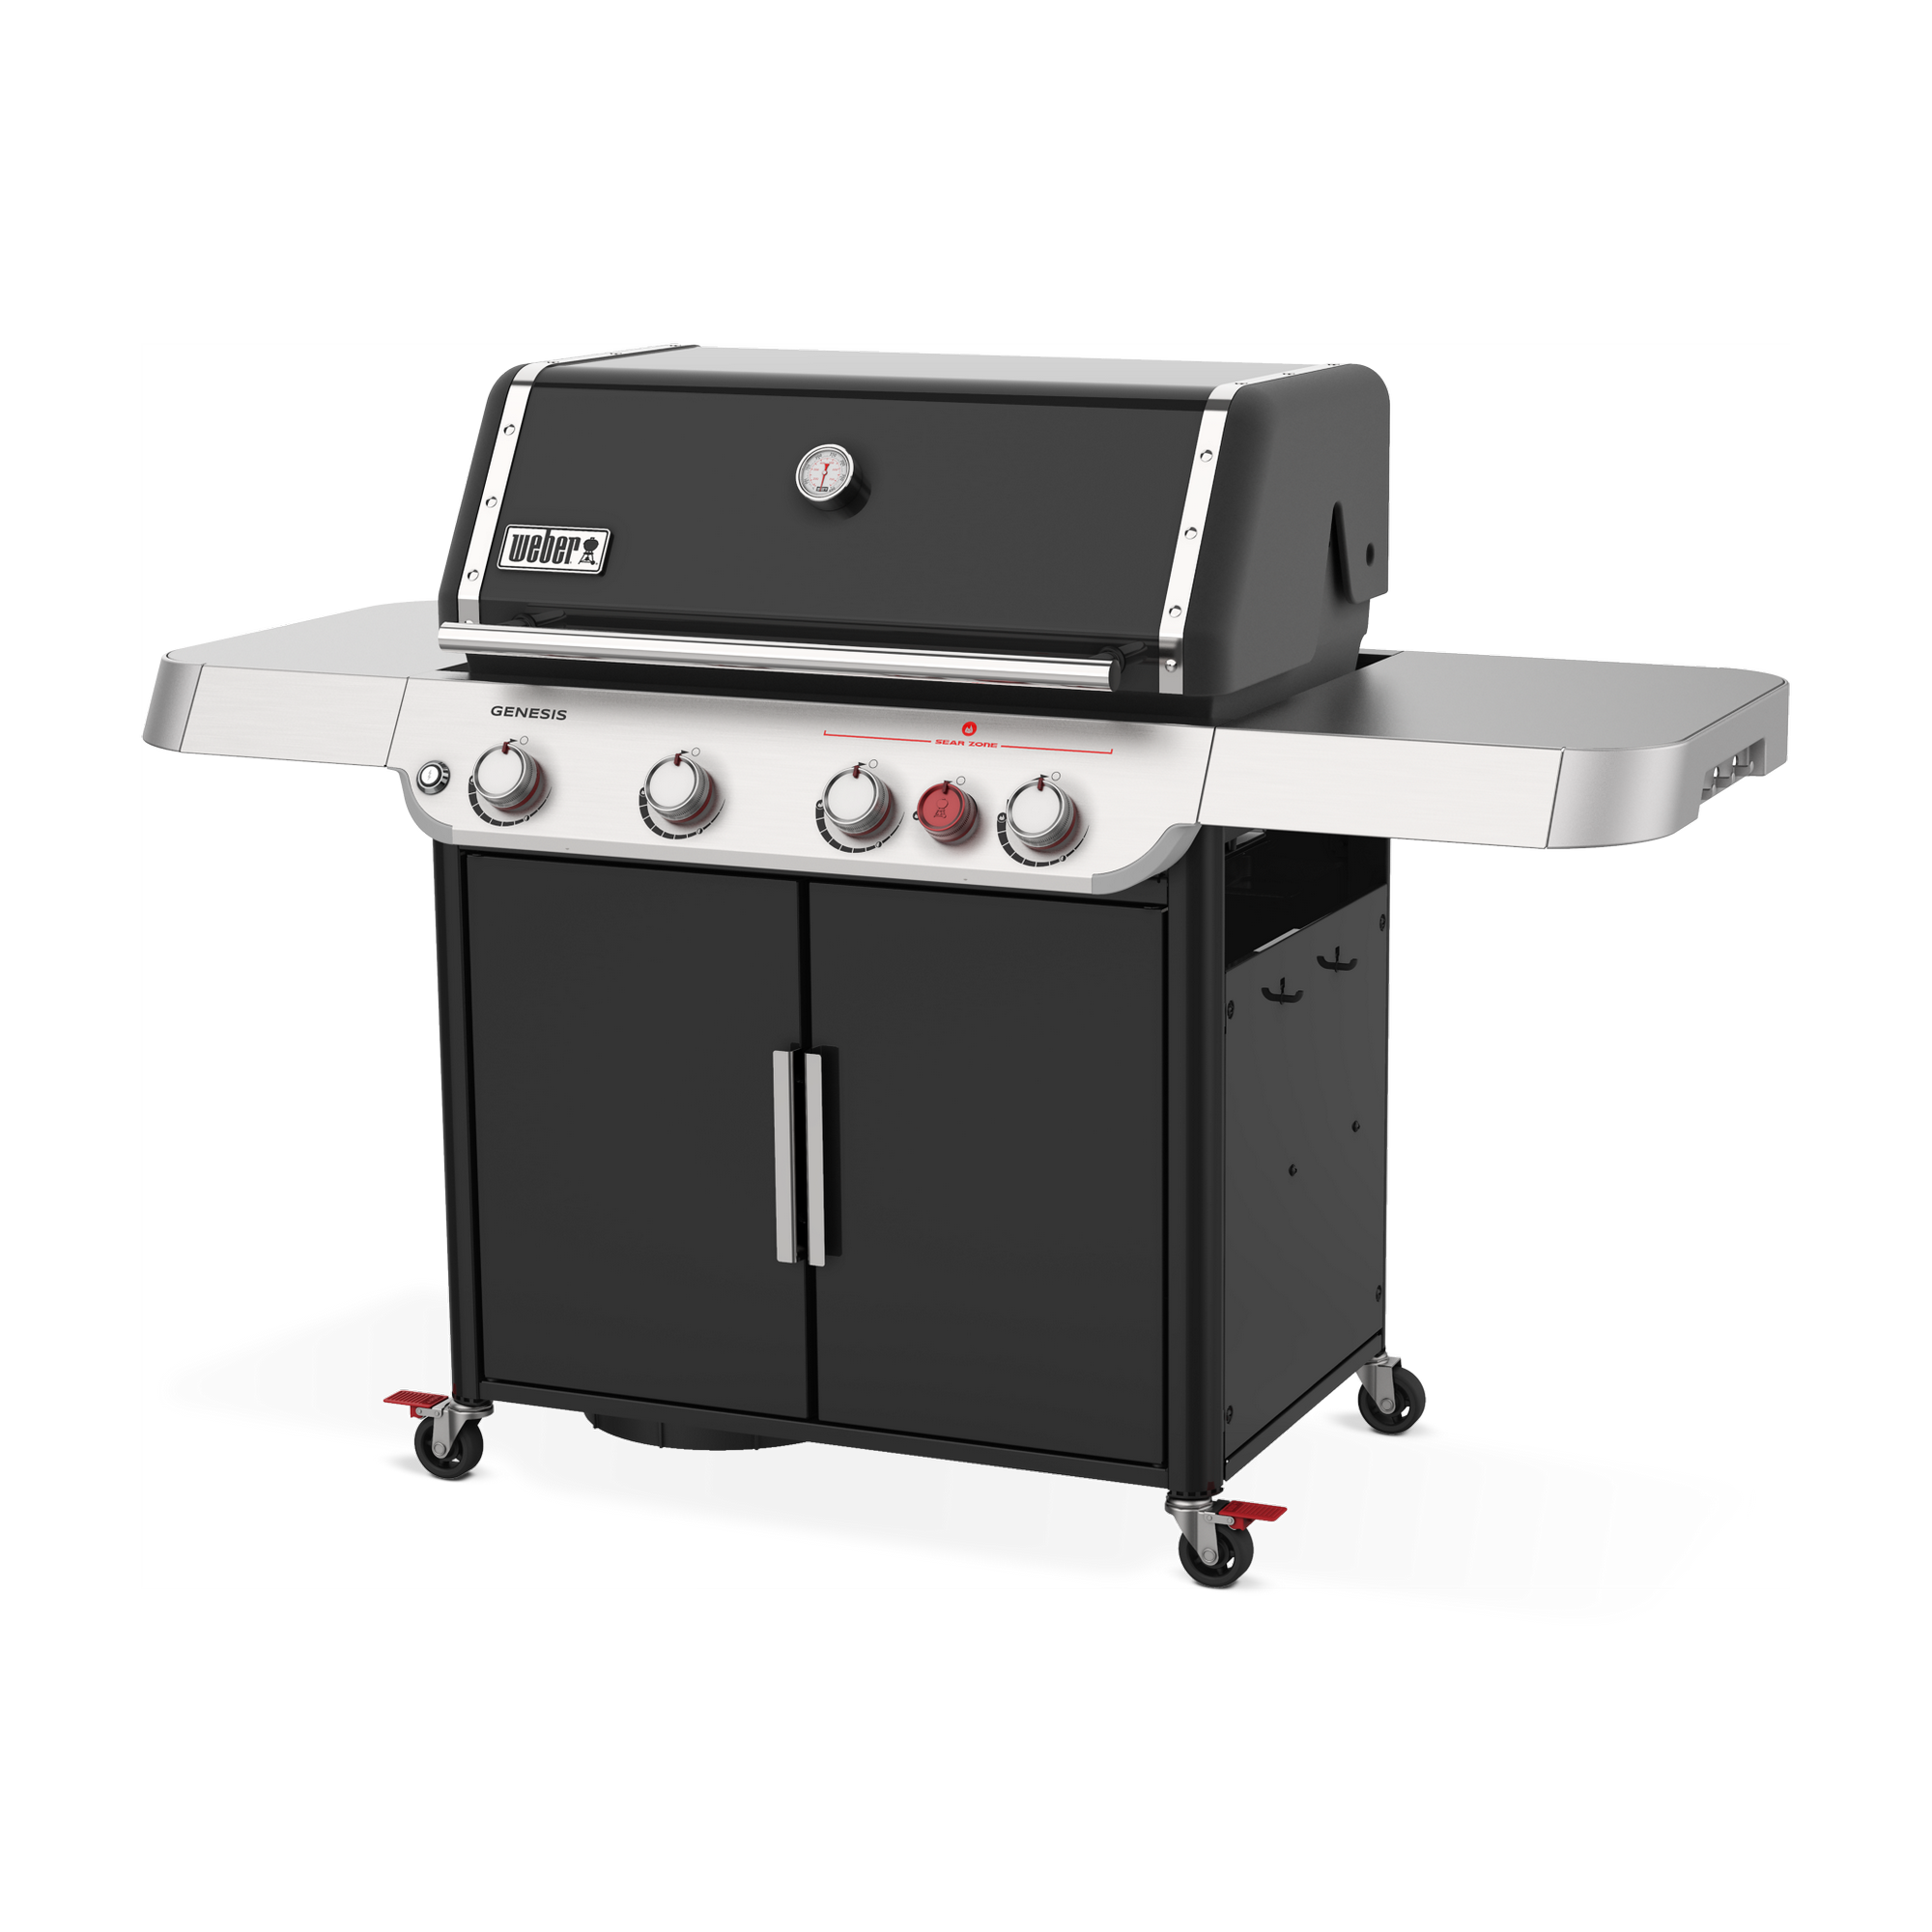 Gasgrill 'Genesis E-425s' schwarz 123,1 x 173,9 x 68,5 cm, 4 Brenner + product picture